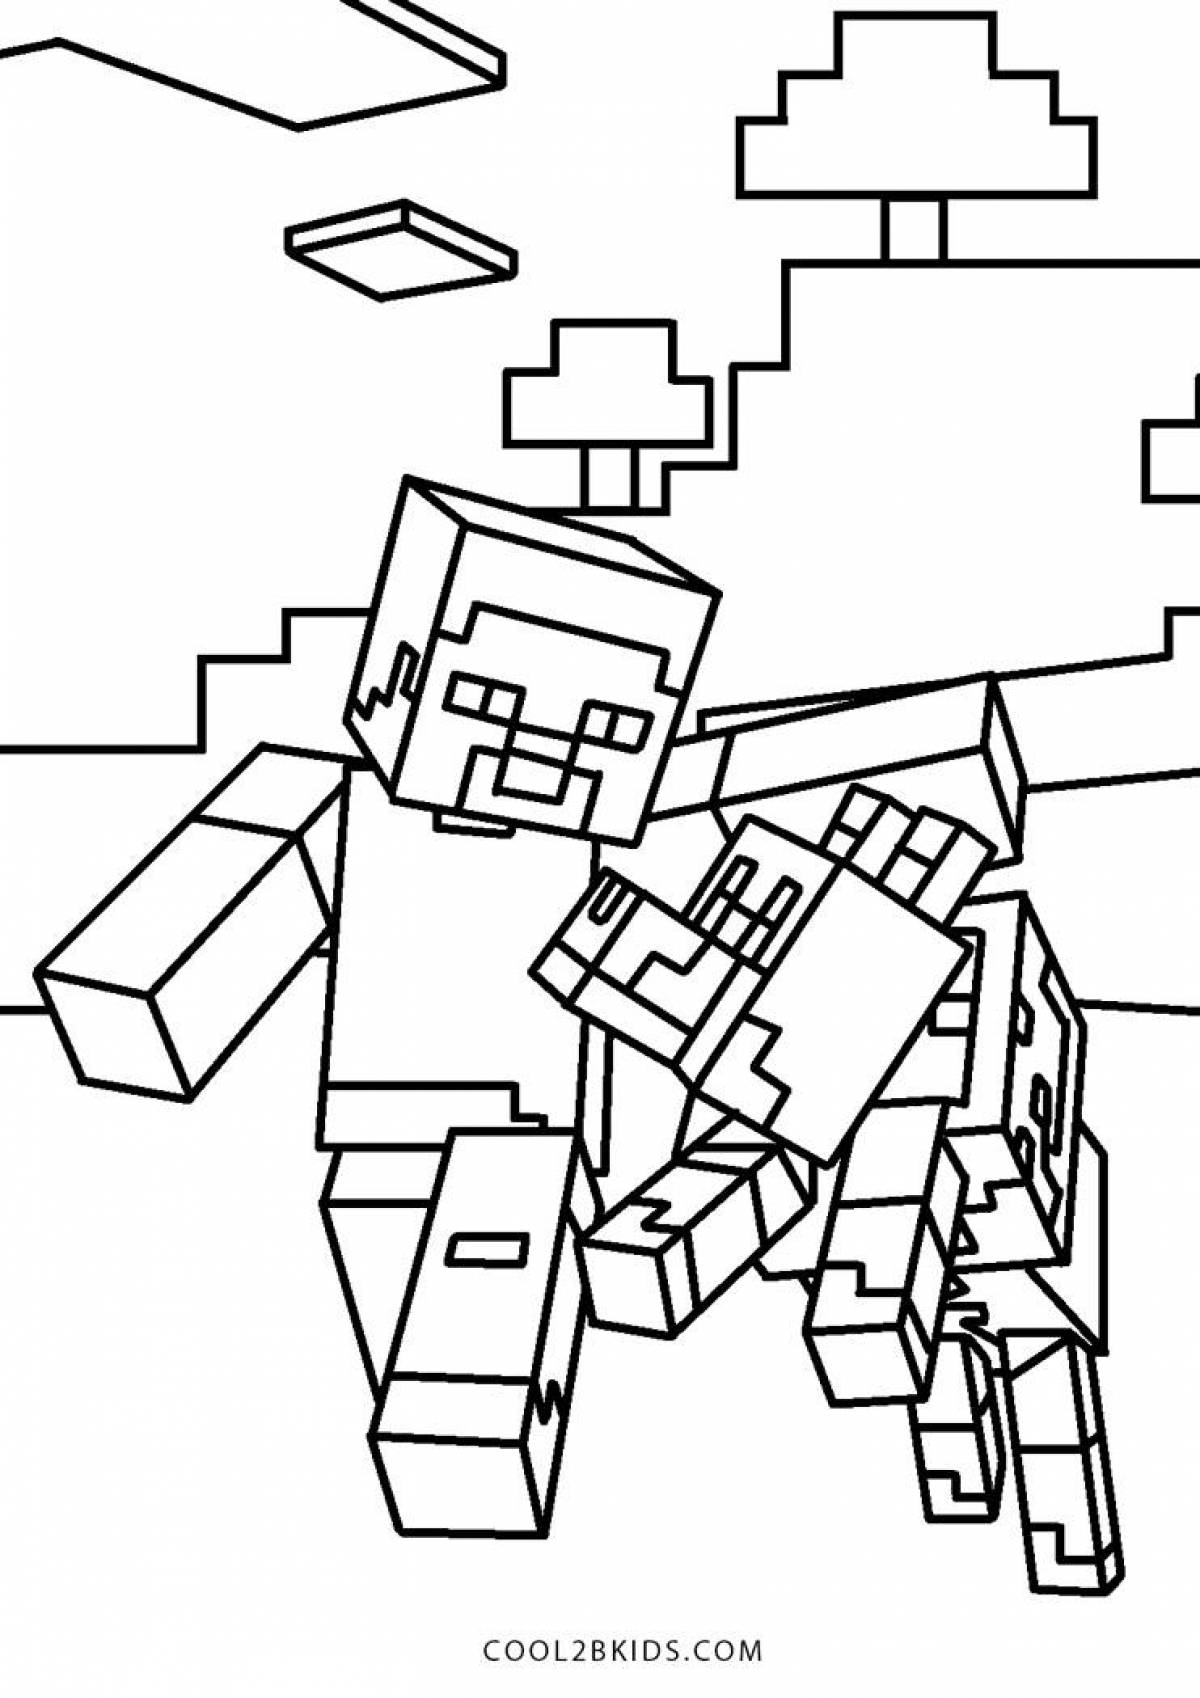 Gorgeous minecraft village coloring page